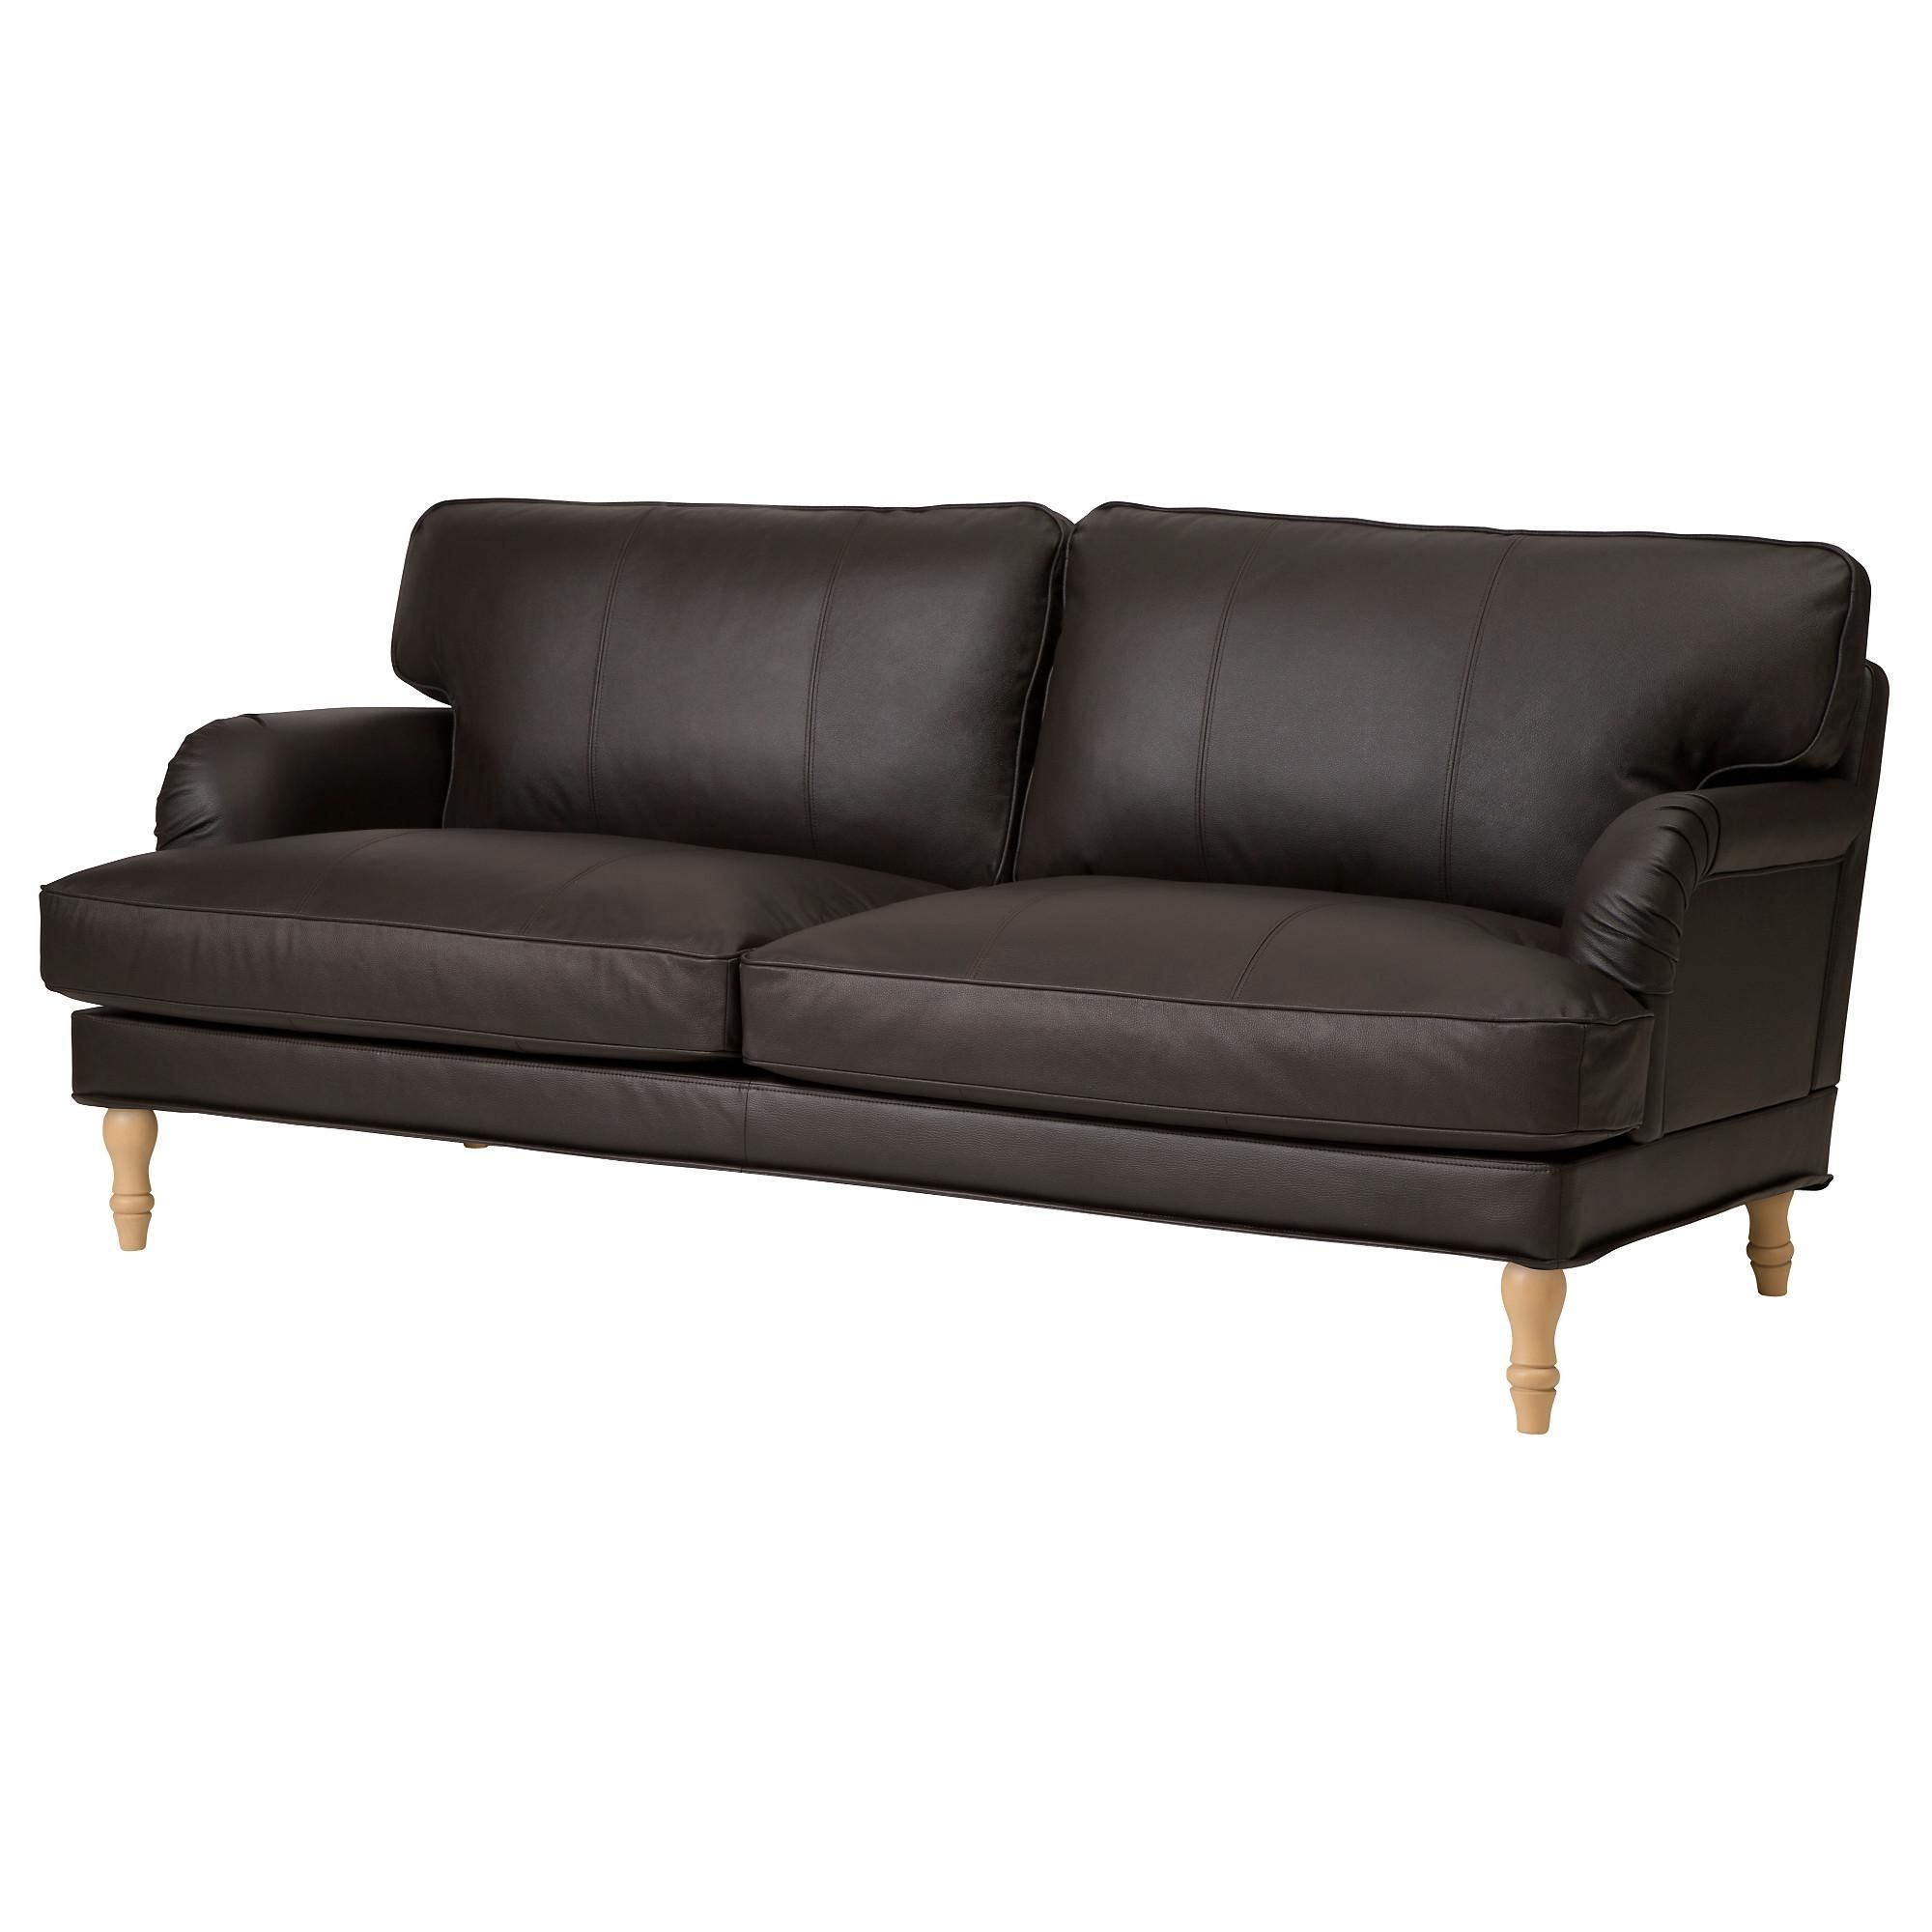 Leather & Faux Leather Couches, Chairs & Ottomans – Ikea With Regard To Leather Sofas (Photo 3 of 21)